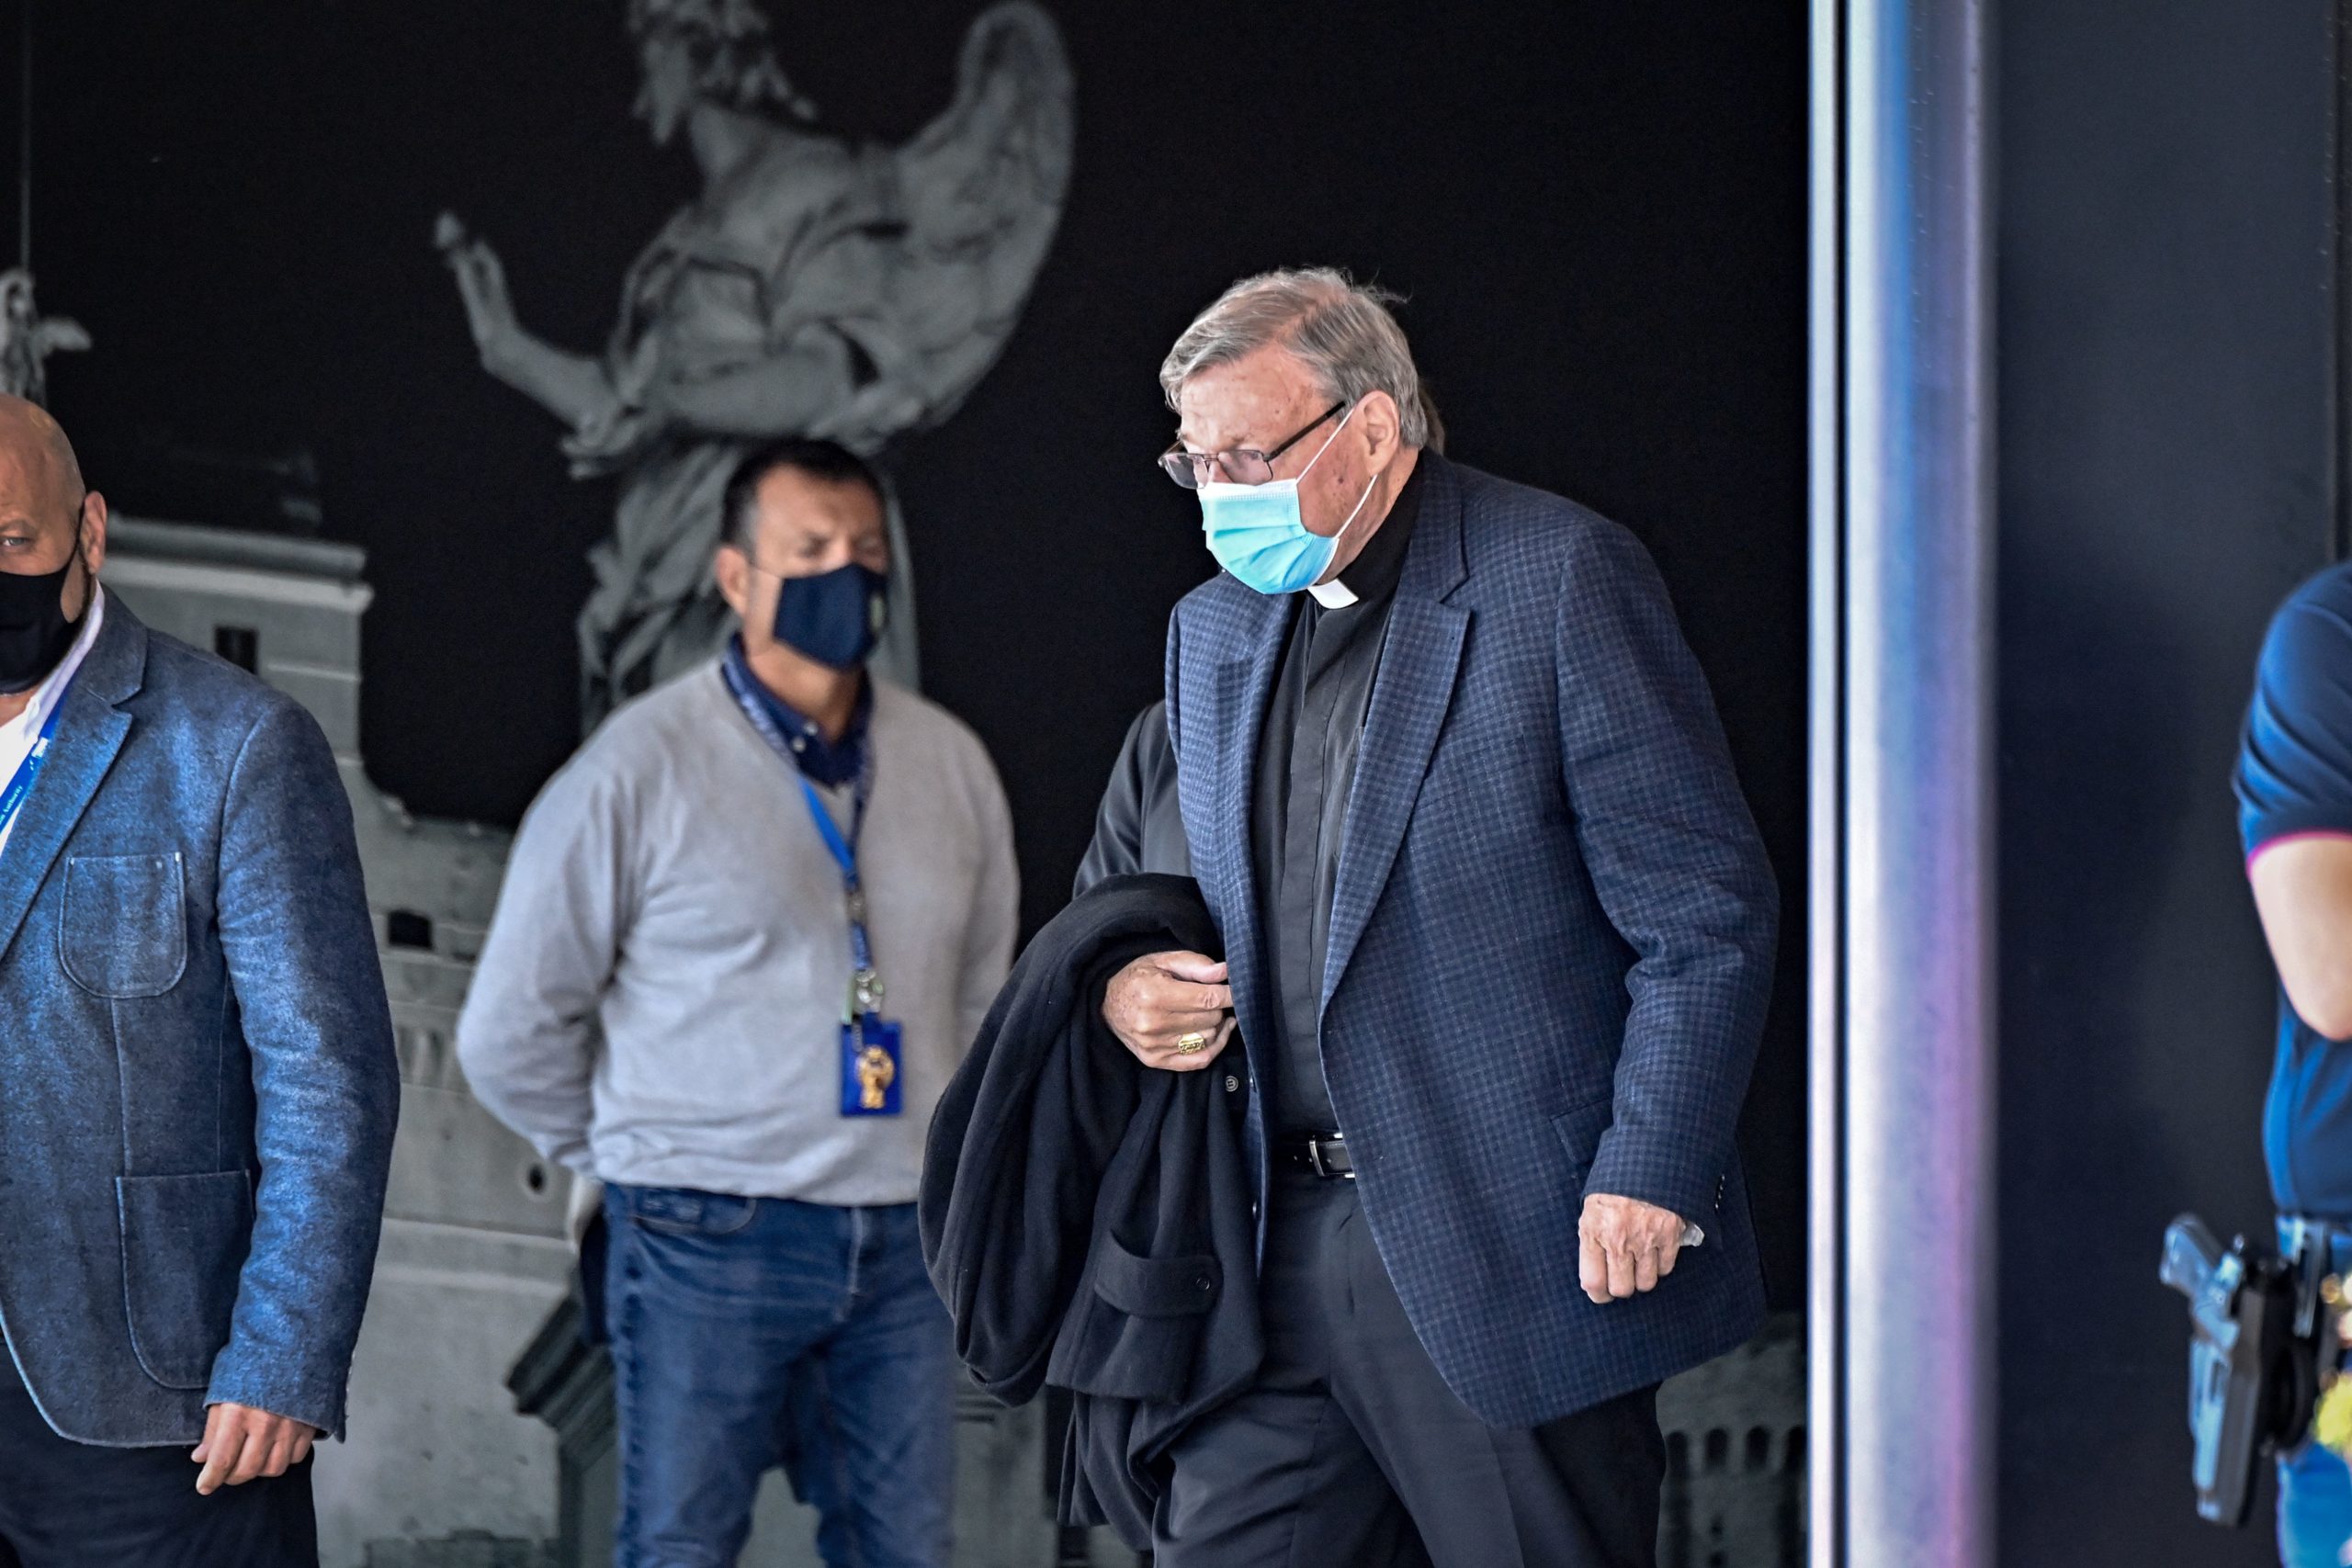 Australian Cardinal George Pell prepares to get into a car after landing at Rome's Fiumicino airport on Sept. 30, returning for the first time since being acquitted of sexual abuse charges. (Alberto Pizzoli/AFP via Getty Images)